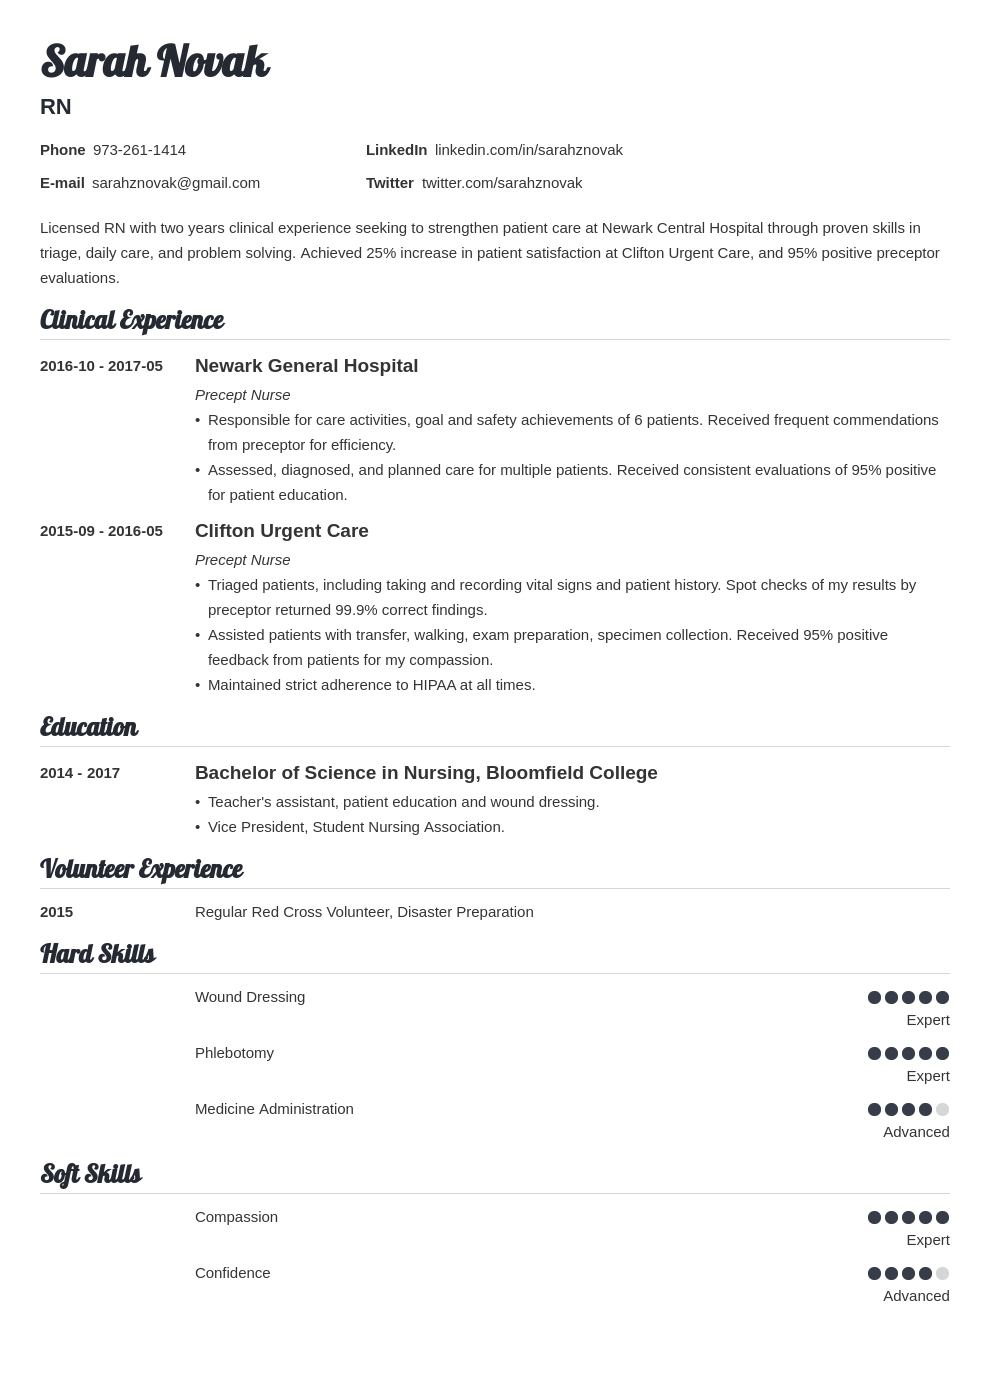 Graduate Nurse Resume Template Free from cdn-images.zety.com